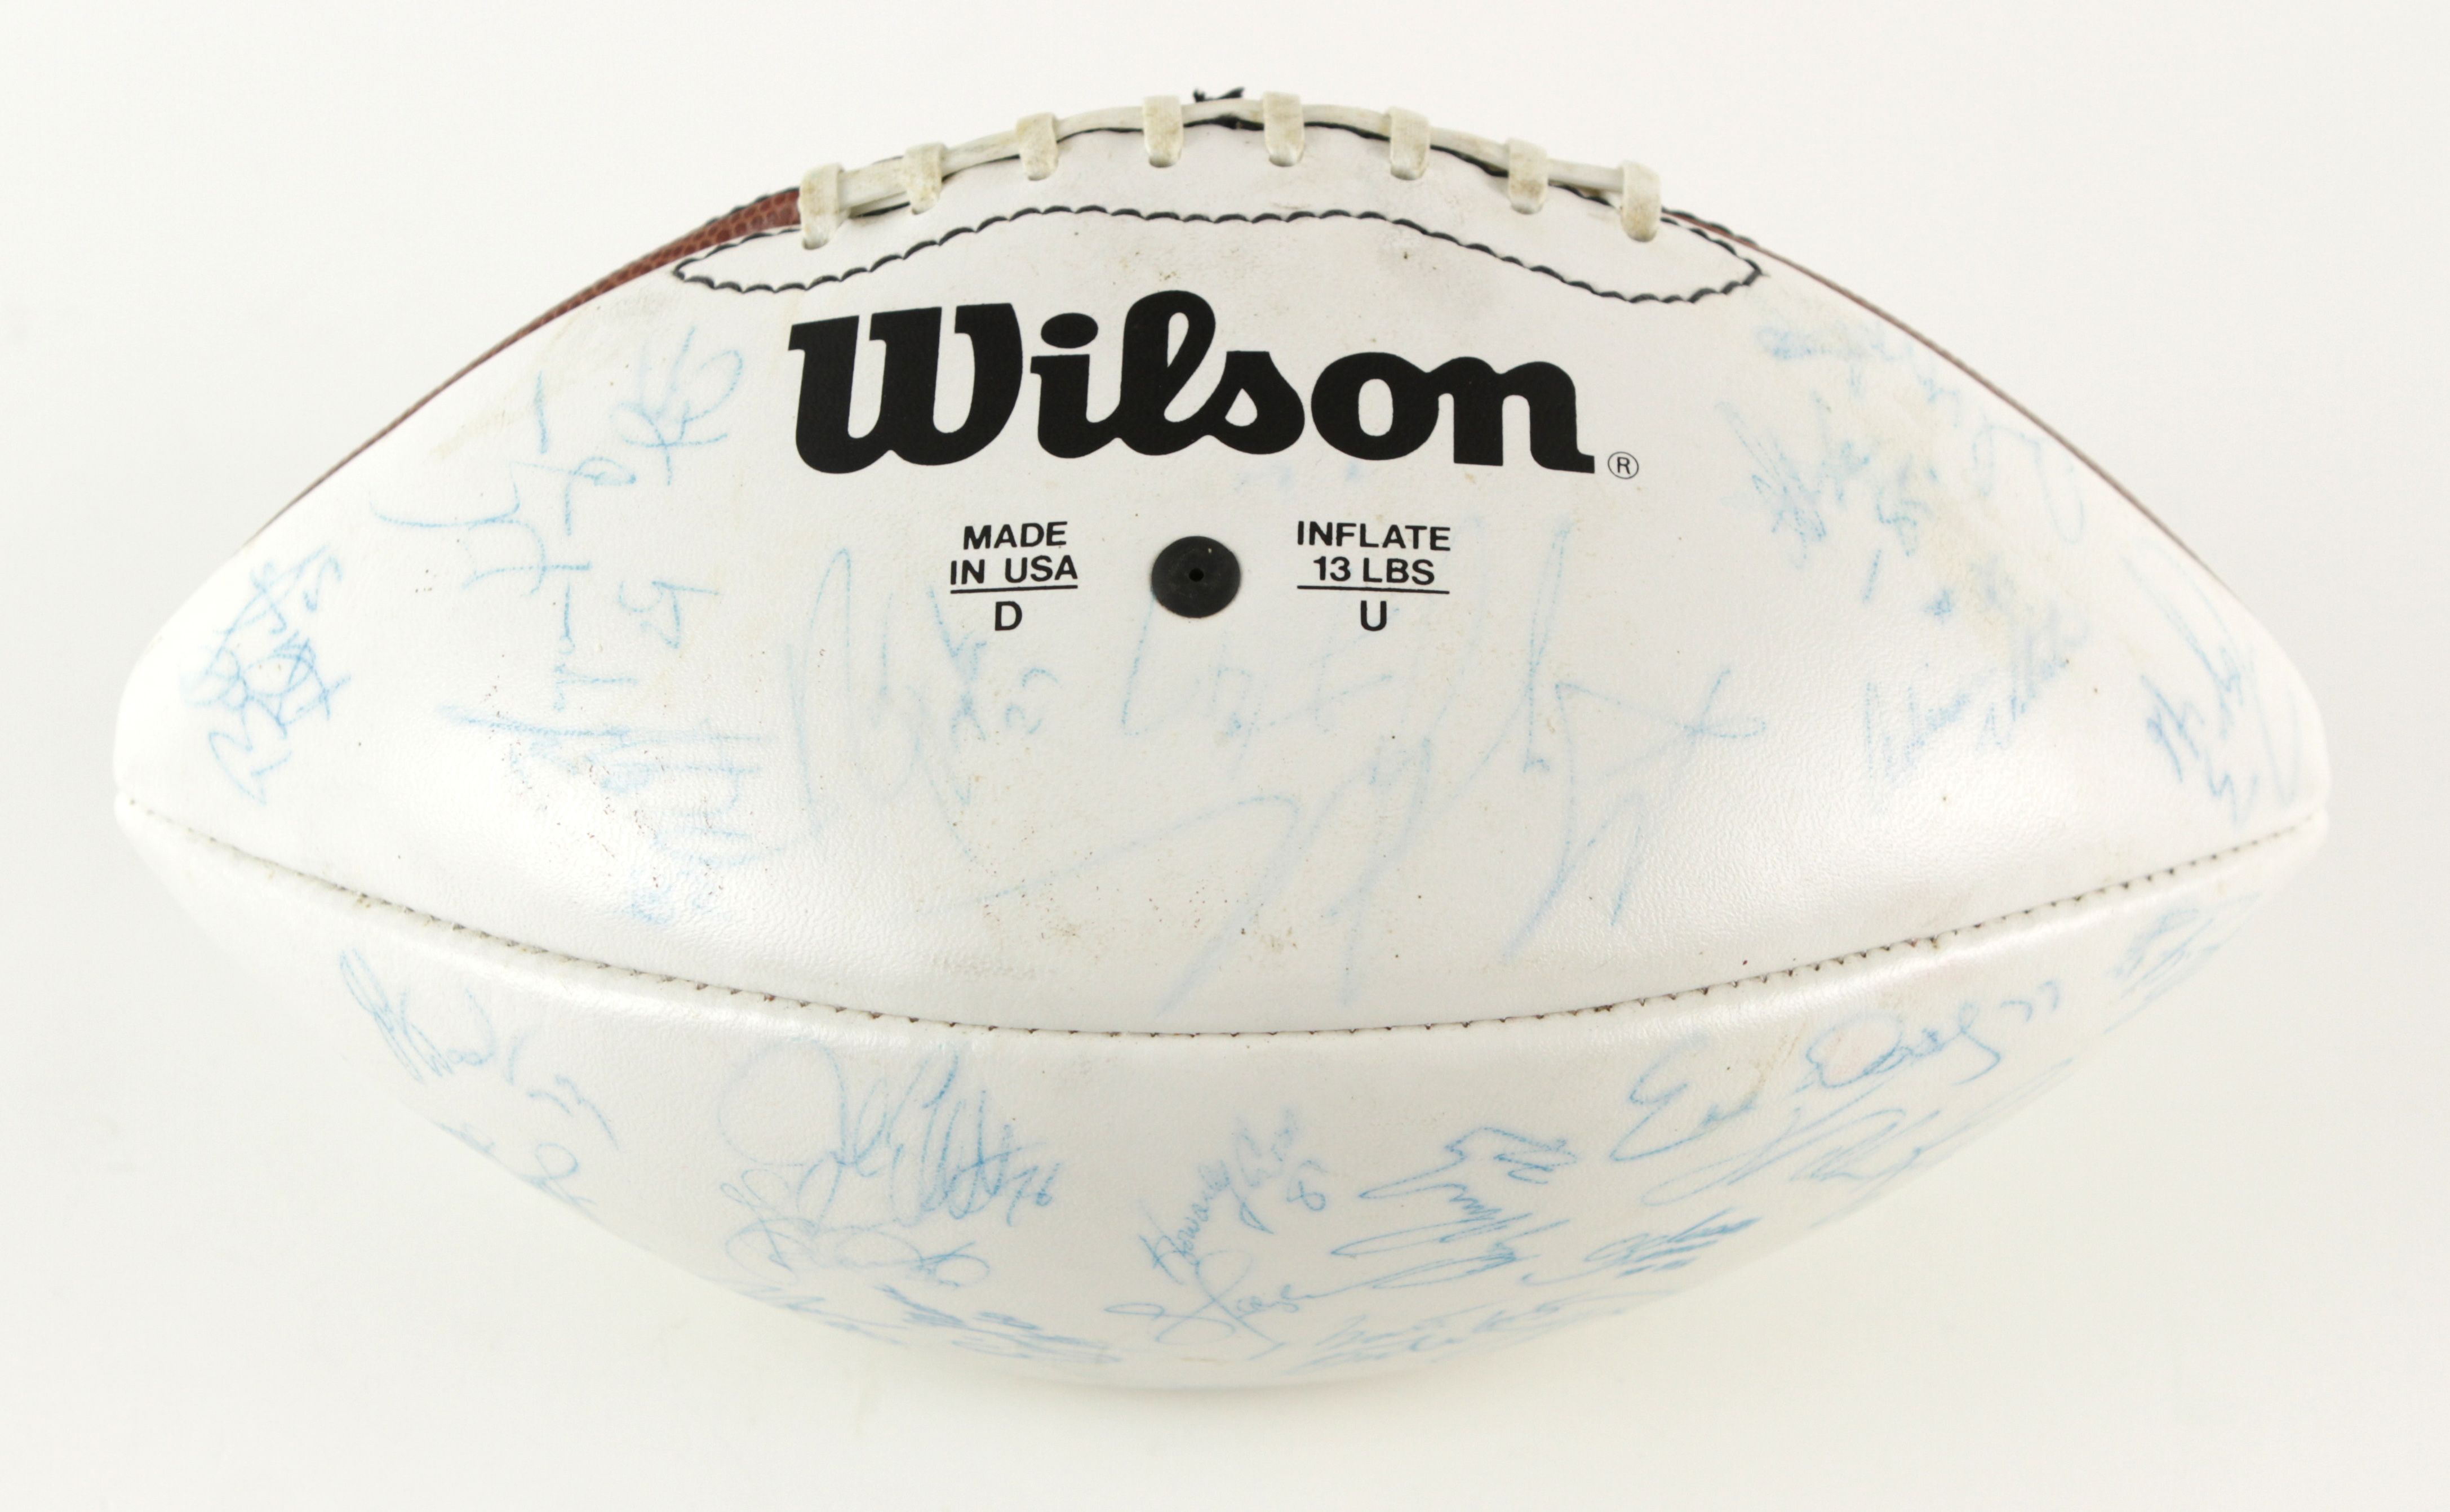 Phil Simms New York Giants Autographed White Panel Football